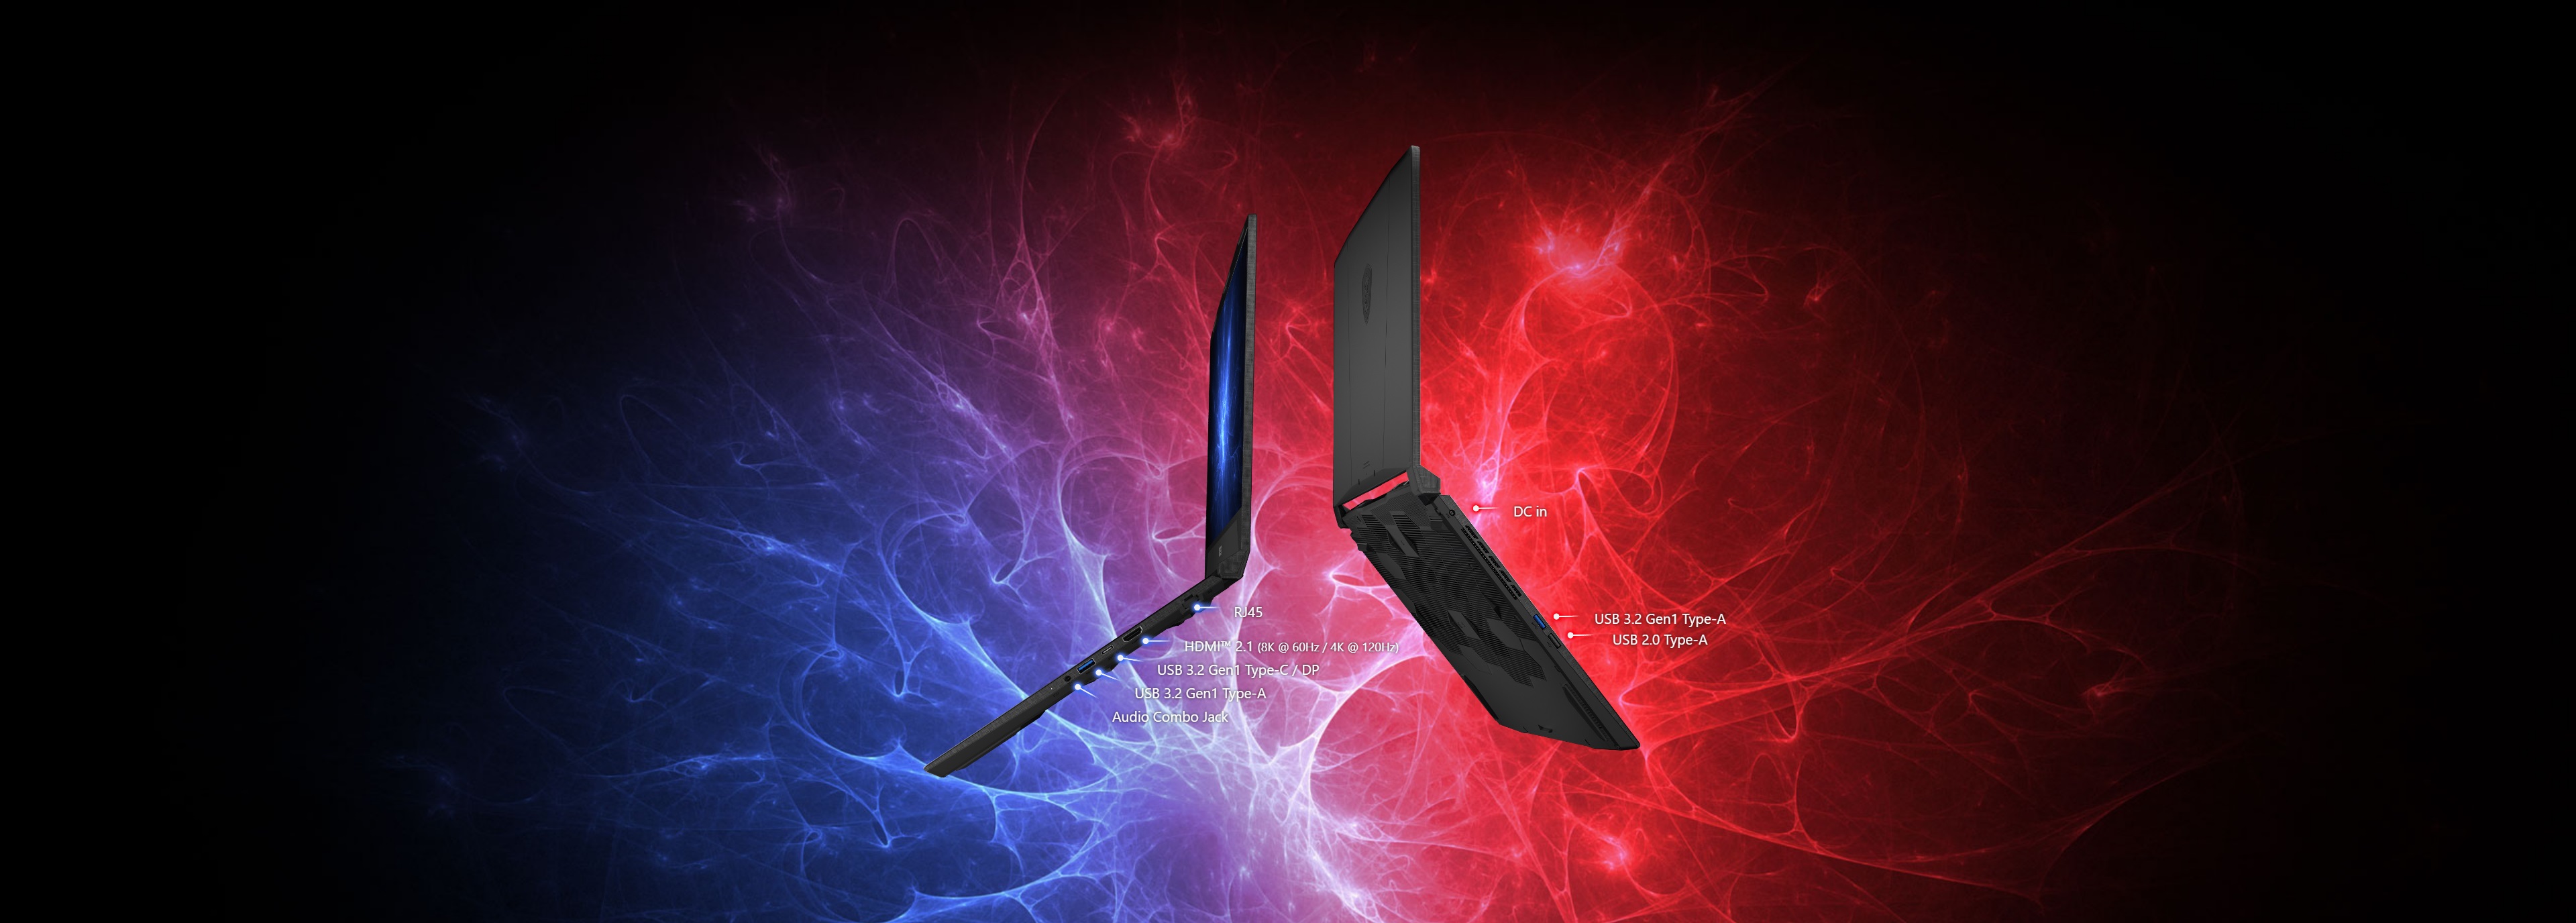 A large marketing image providing additional information about the product MSI Katana 15 B13UDXK-1841AU 15.6" 144Hz 13th i5 13420H RTX 3050 Win 11 Pro Gaming Notebook - Additional alt info not provided